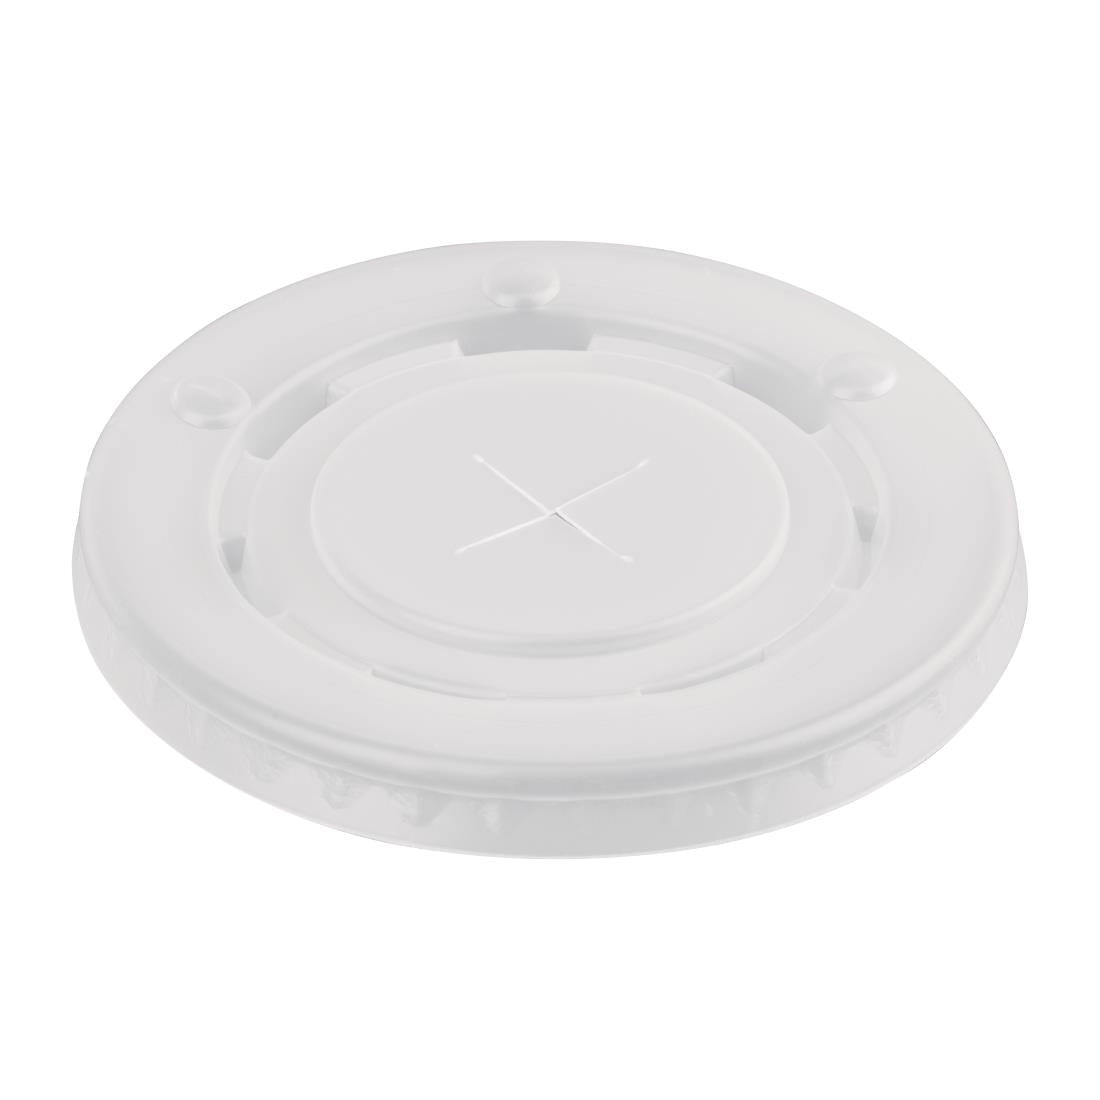 FP784 Fiesta Recyclable Polystyrene Lids for 16oz/20oz Cold Paper Cups 90mm (Pack of 1000) JD Catering Equipment Solutions Ltd